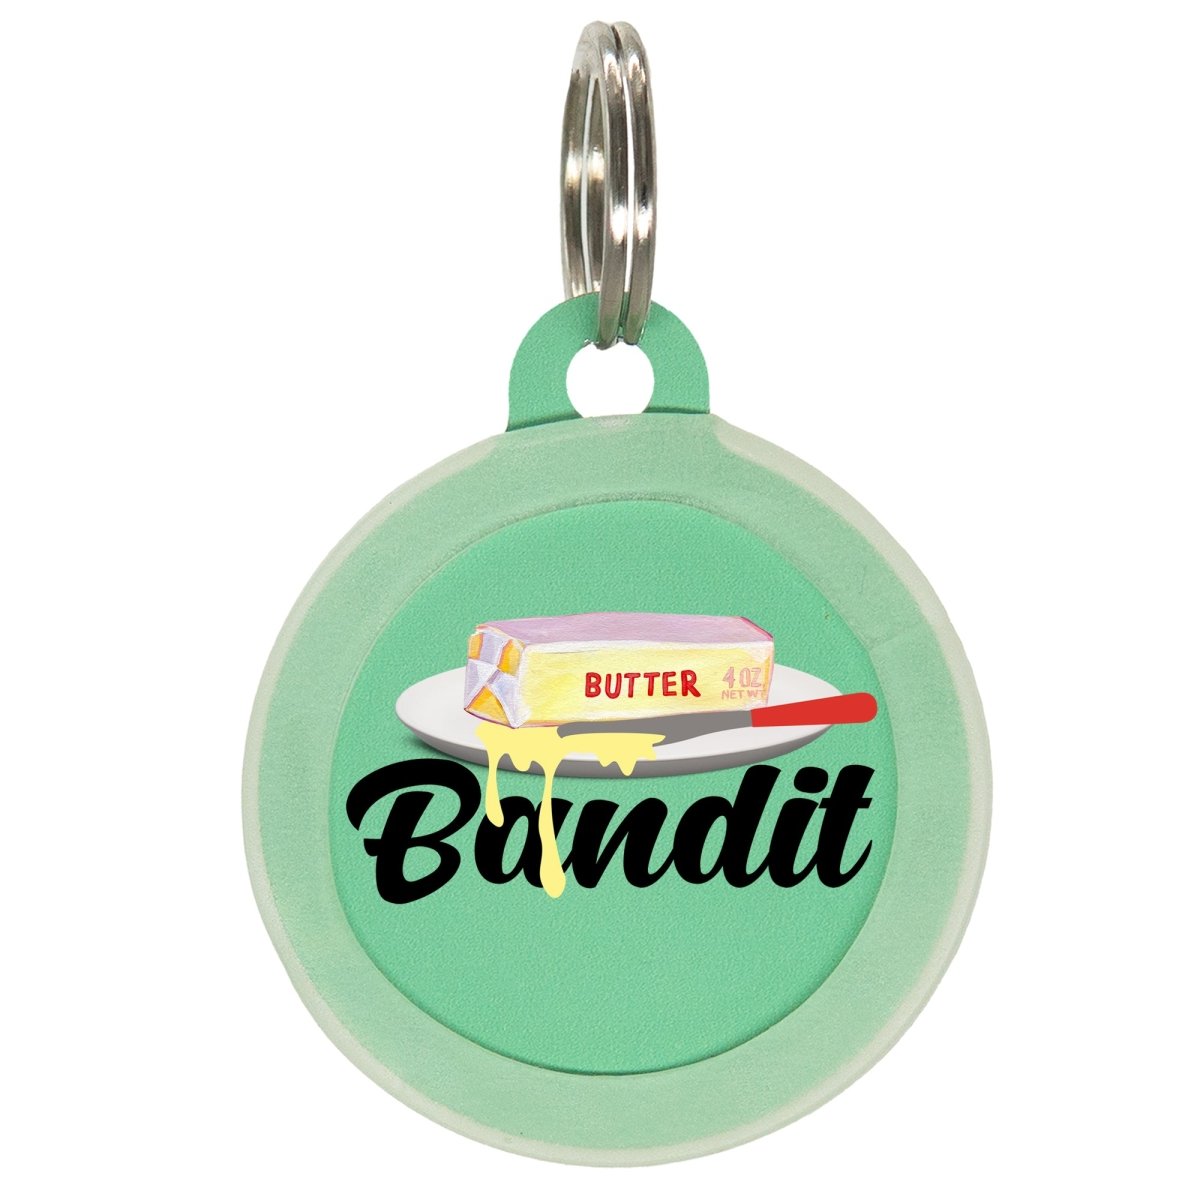 Butter Bandit Pet ID Tag - Oh My Paw'd